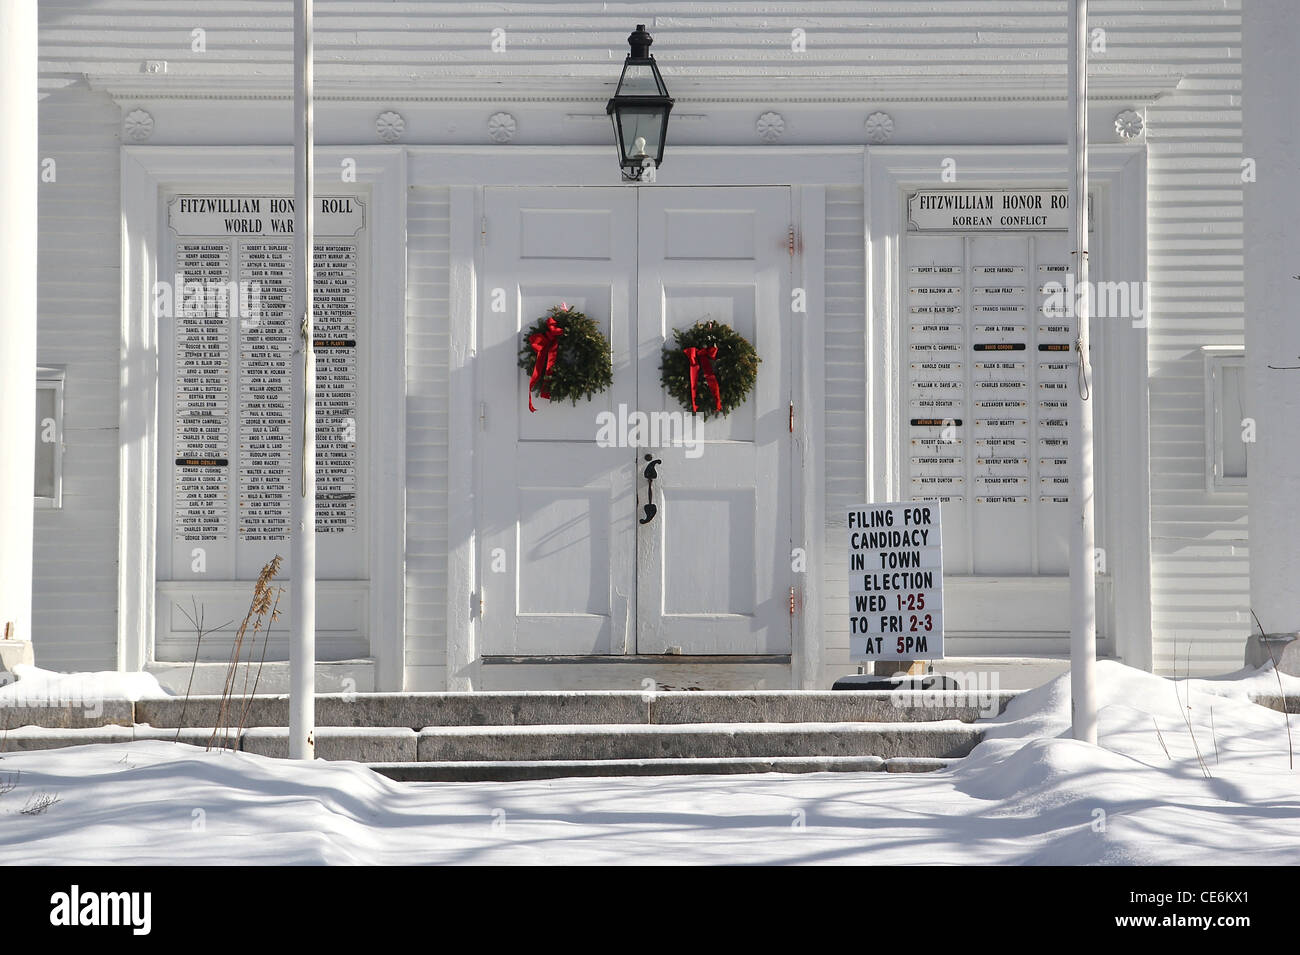 Front doors to Fitzwilliam Town Hall in winter decorated with Christmas wreaths Stock Photo